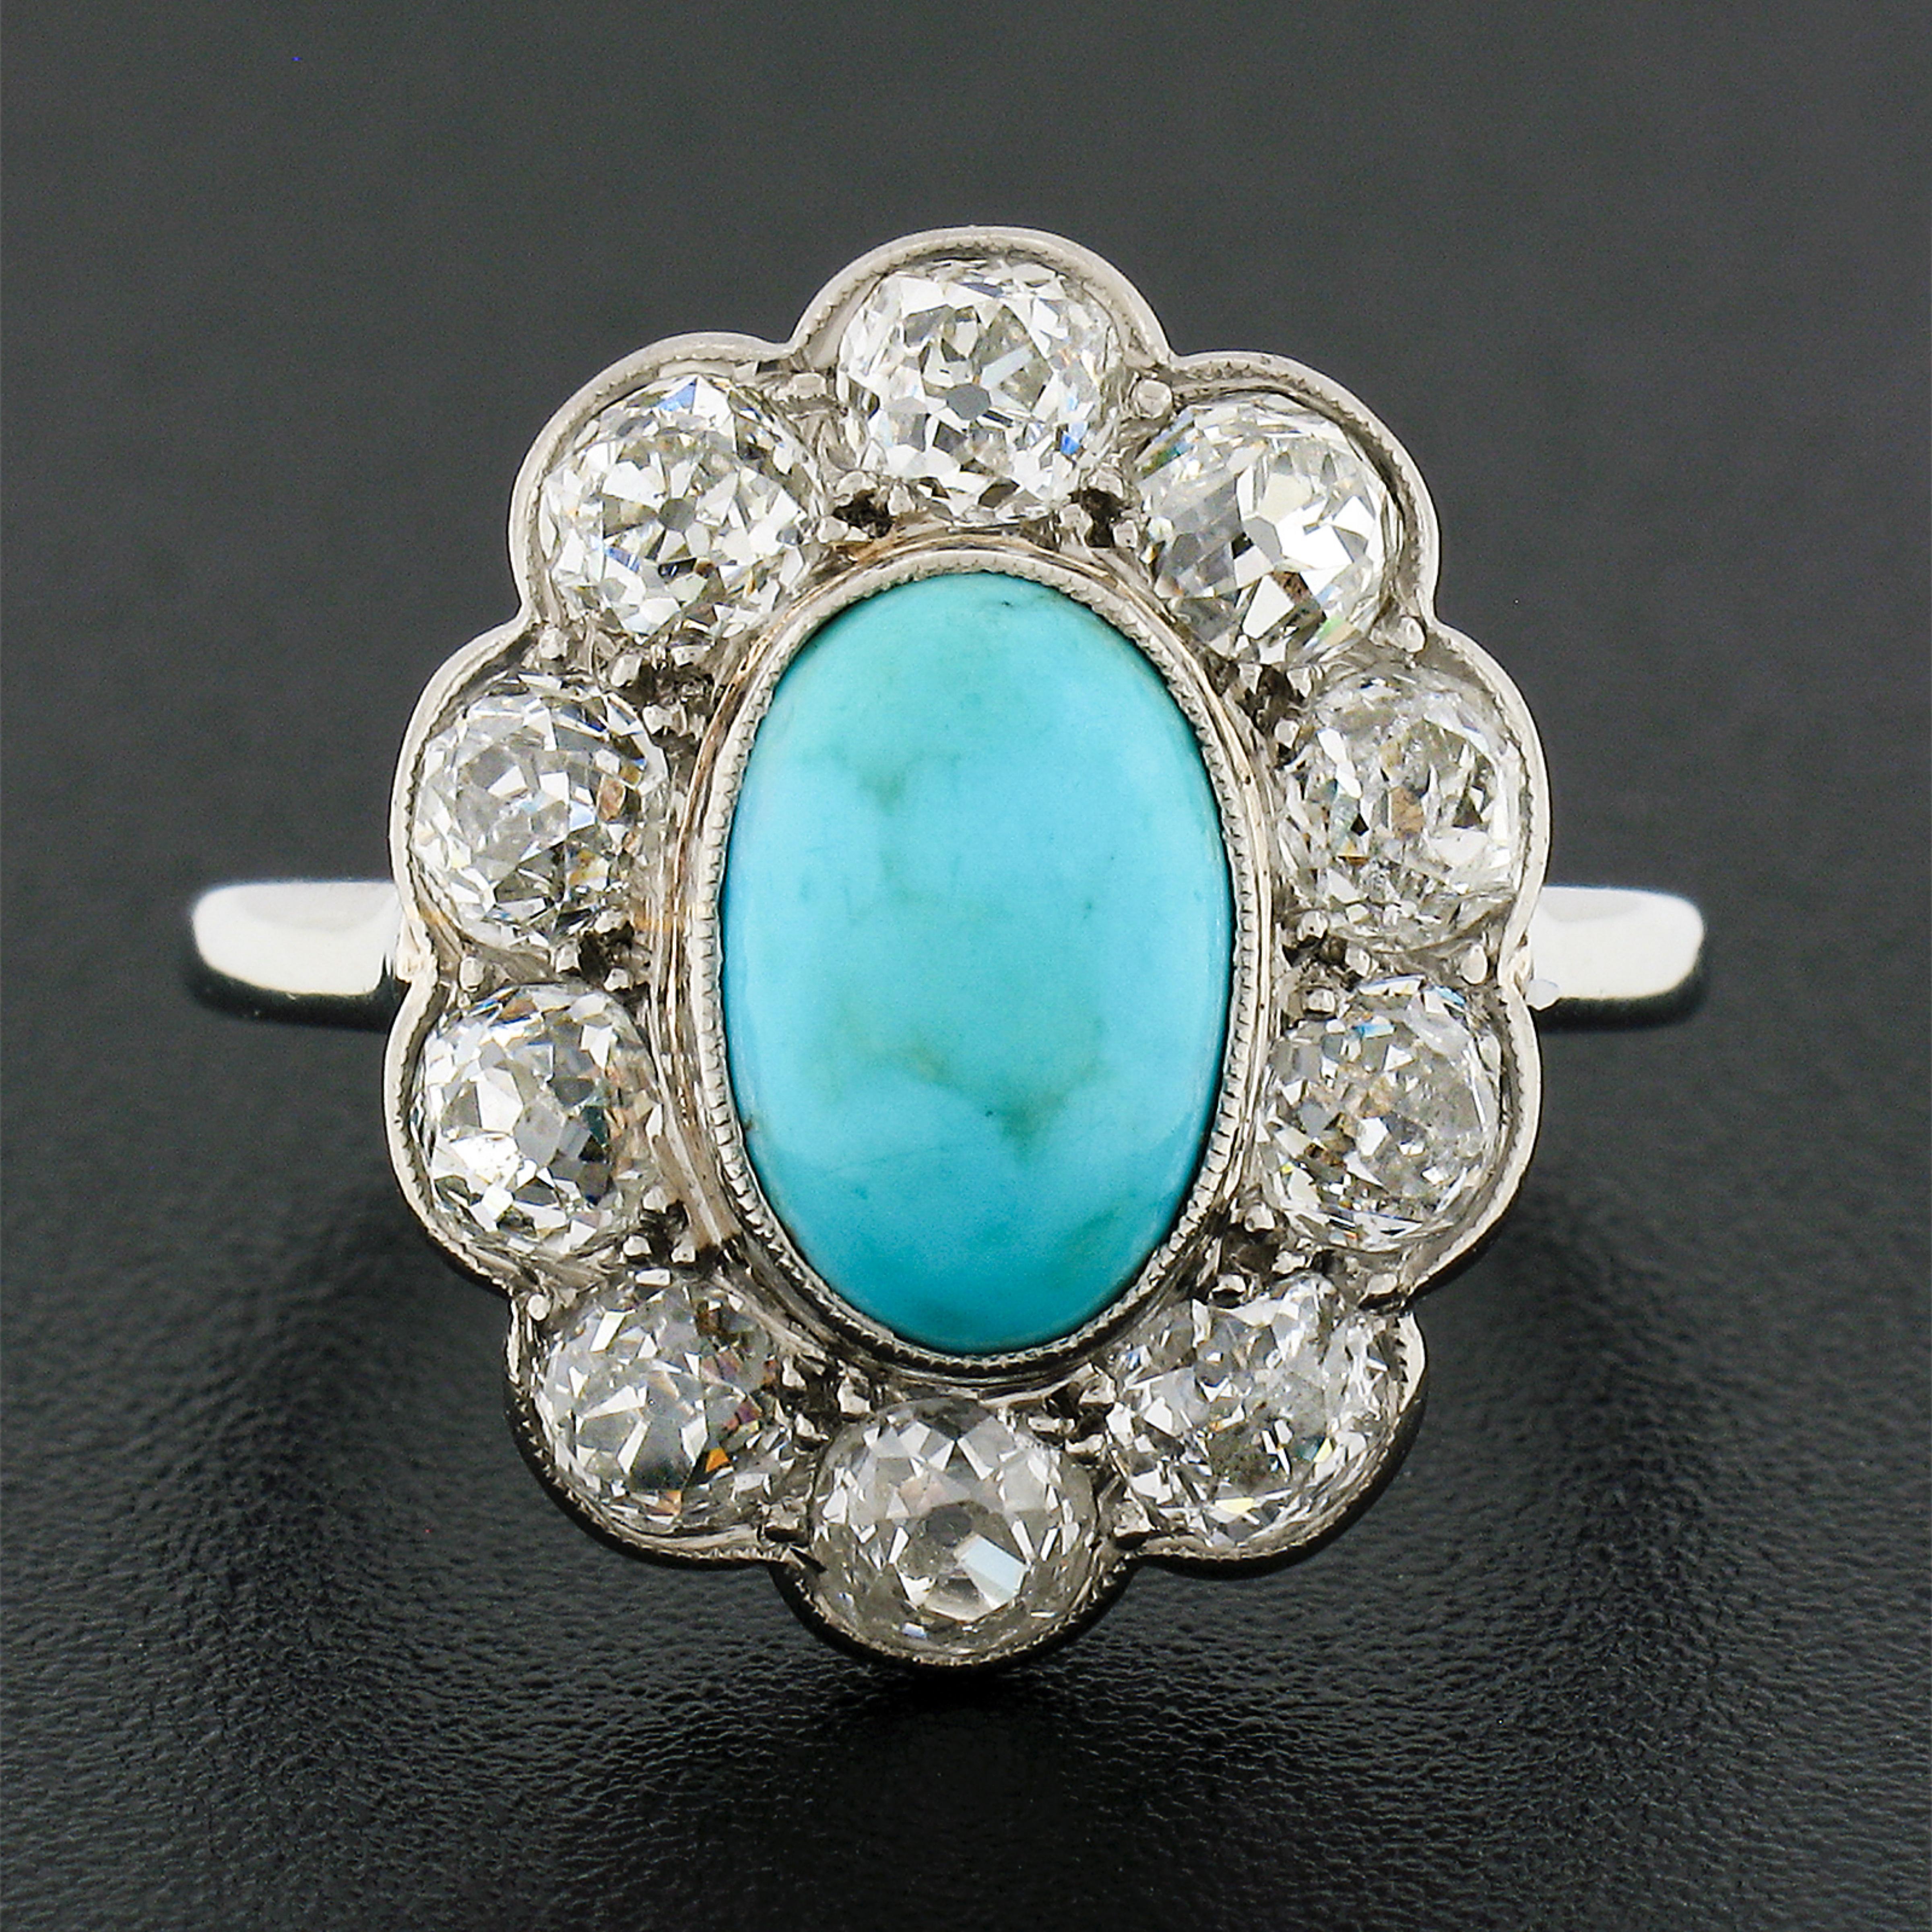 This absolutely gorgeous antique ring was crafted during the late Victorian/Edwardian era in solid 18k white gold and features a beautiful natural  turquoise stone neatly bezel set at the center of a super lively old mine cut diamond halo. The fine